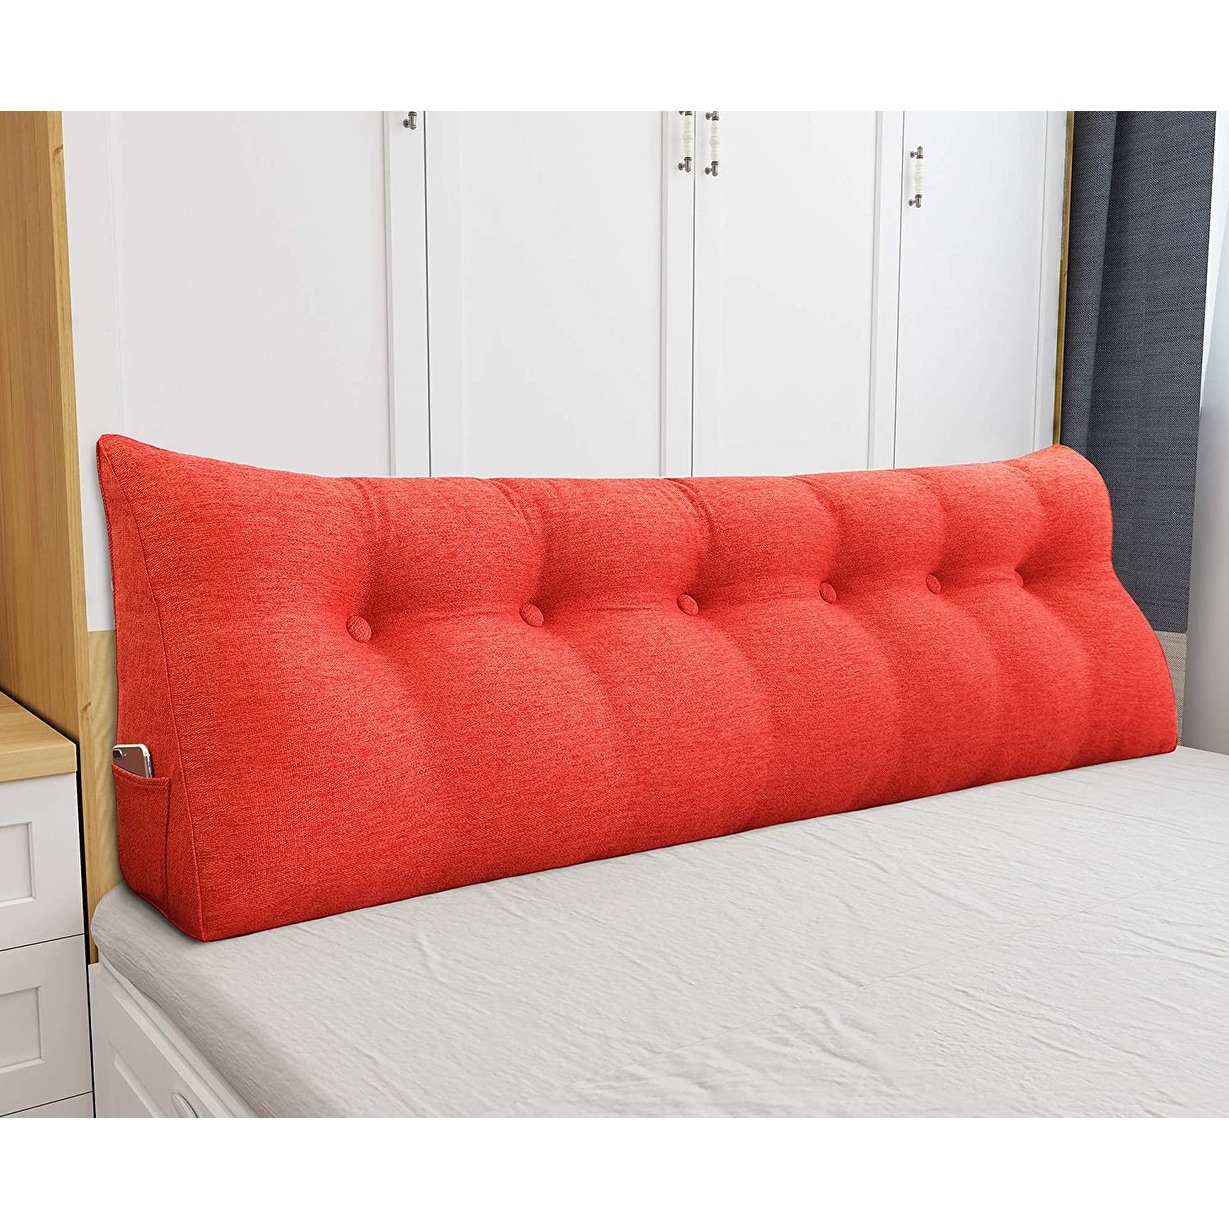 Large Bed Rest Contour Wedge Pillow Reading Back Support Cushion - On Sale  - Bed Bath & Beyond - 34610234